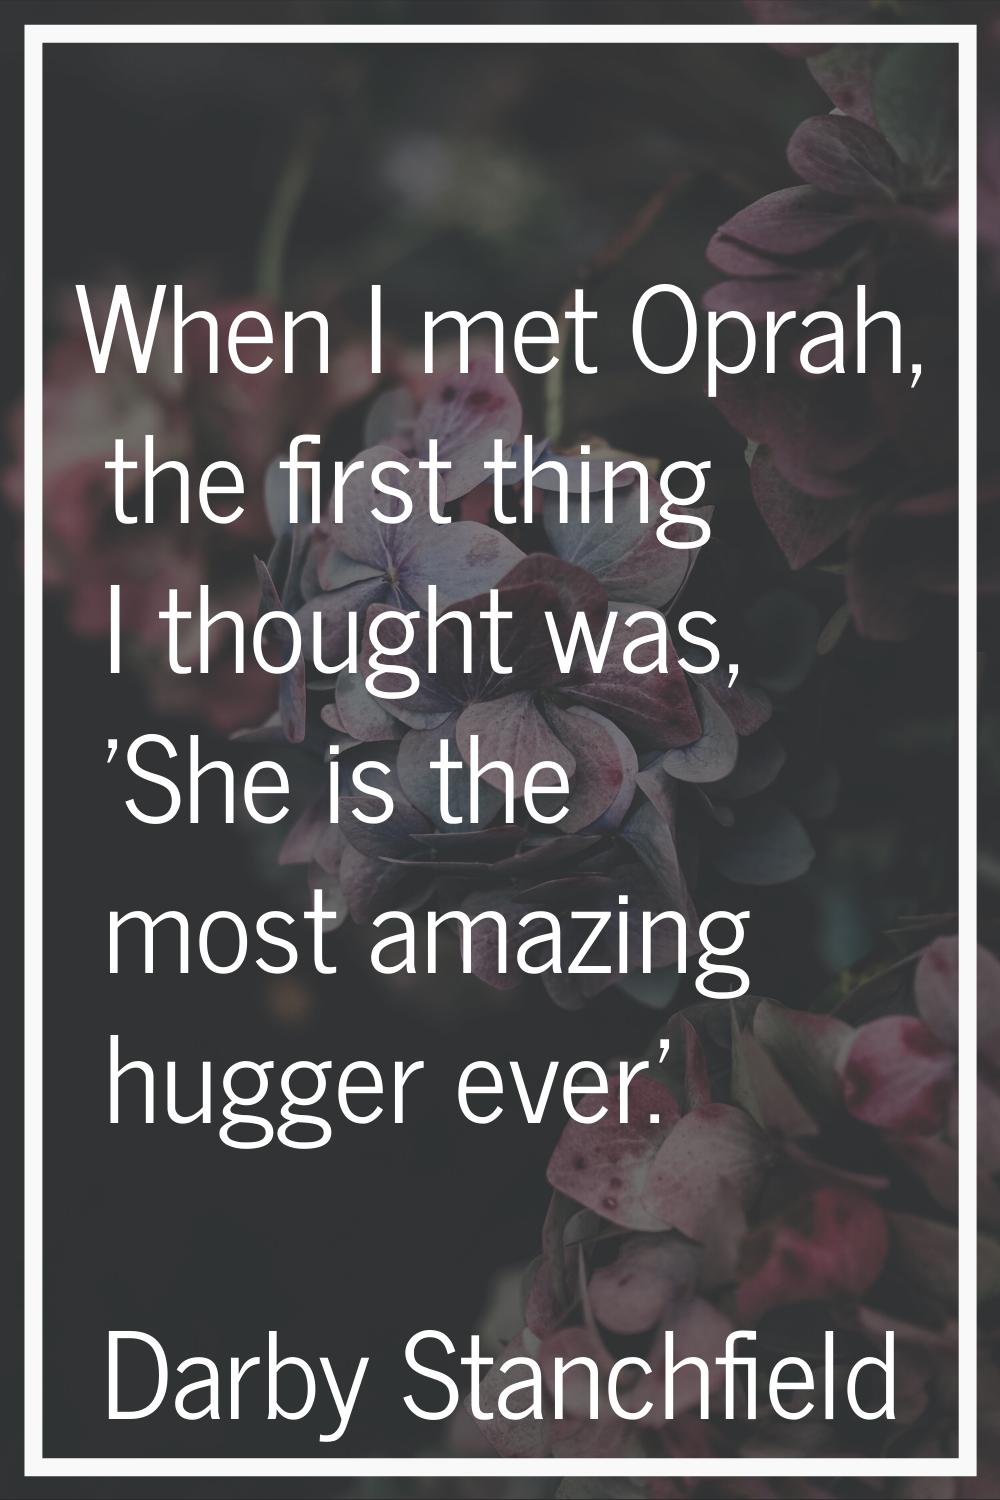 When I met Oprah, the first thing I thought was, 'She is the most amazing hugger ever.'